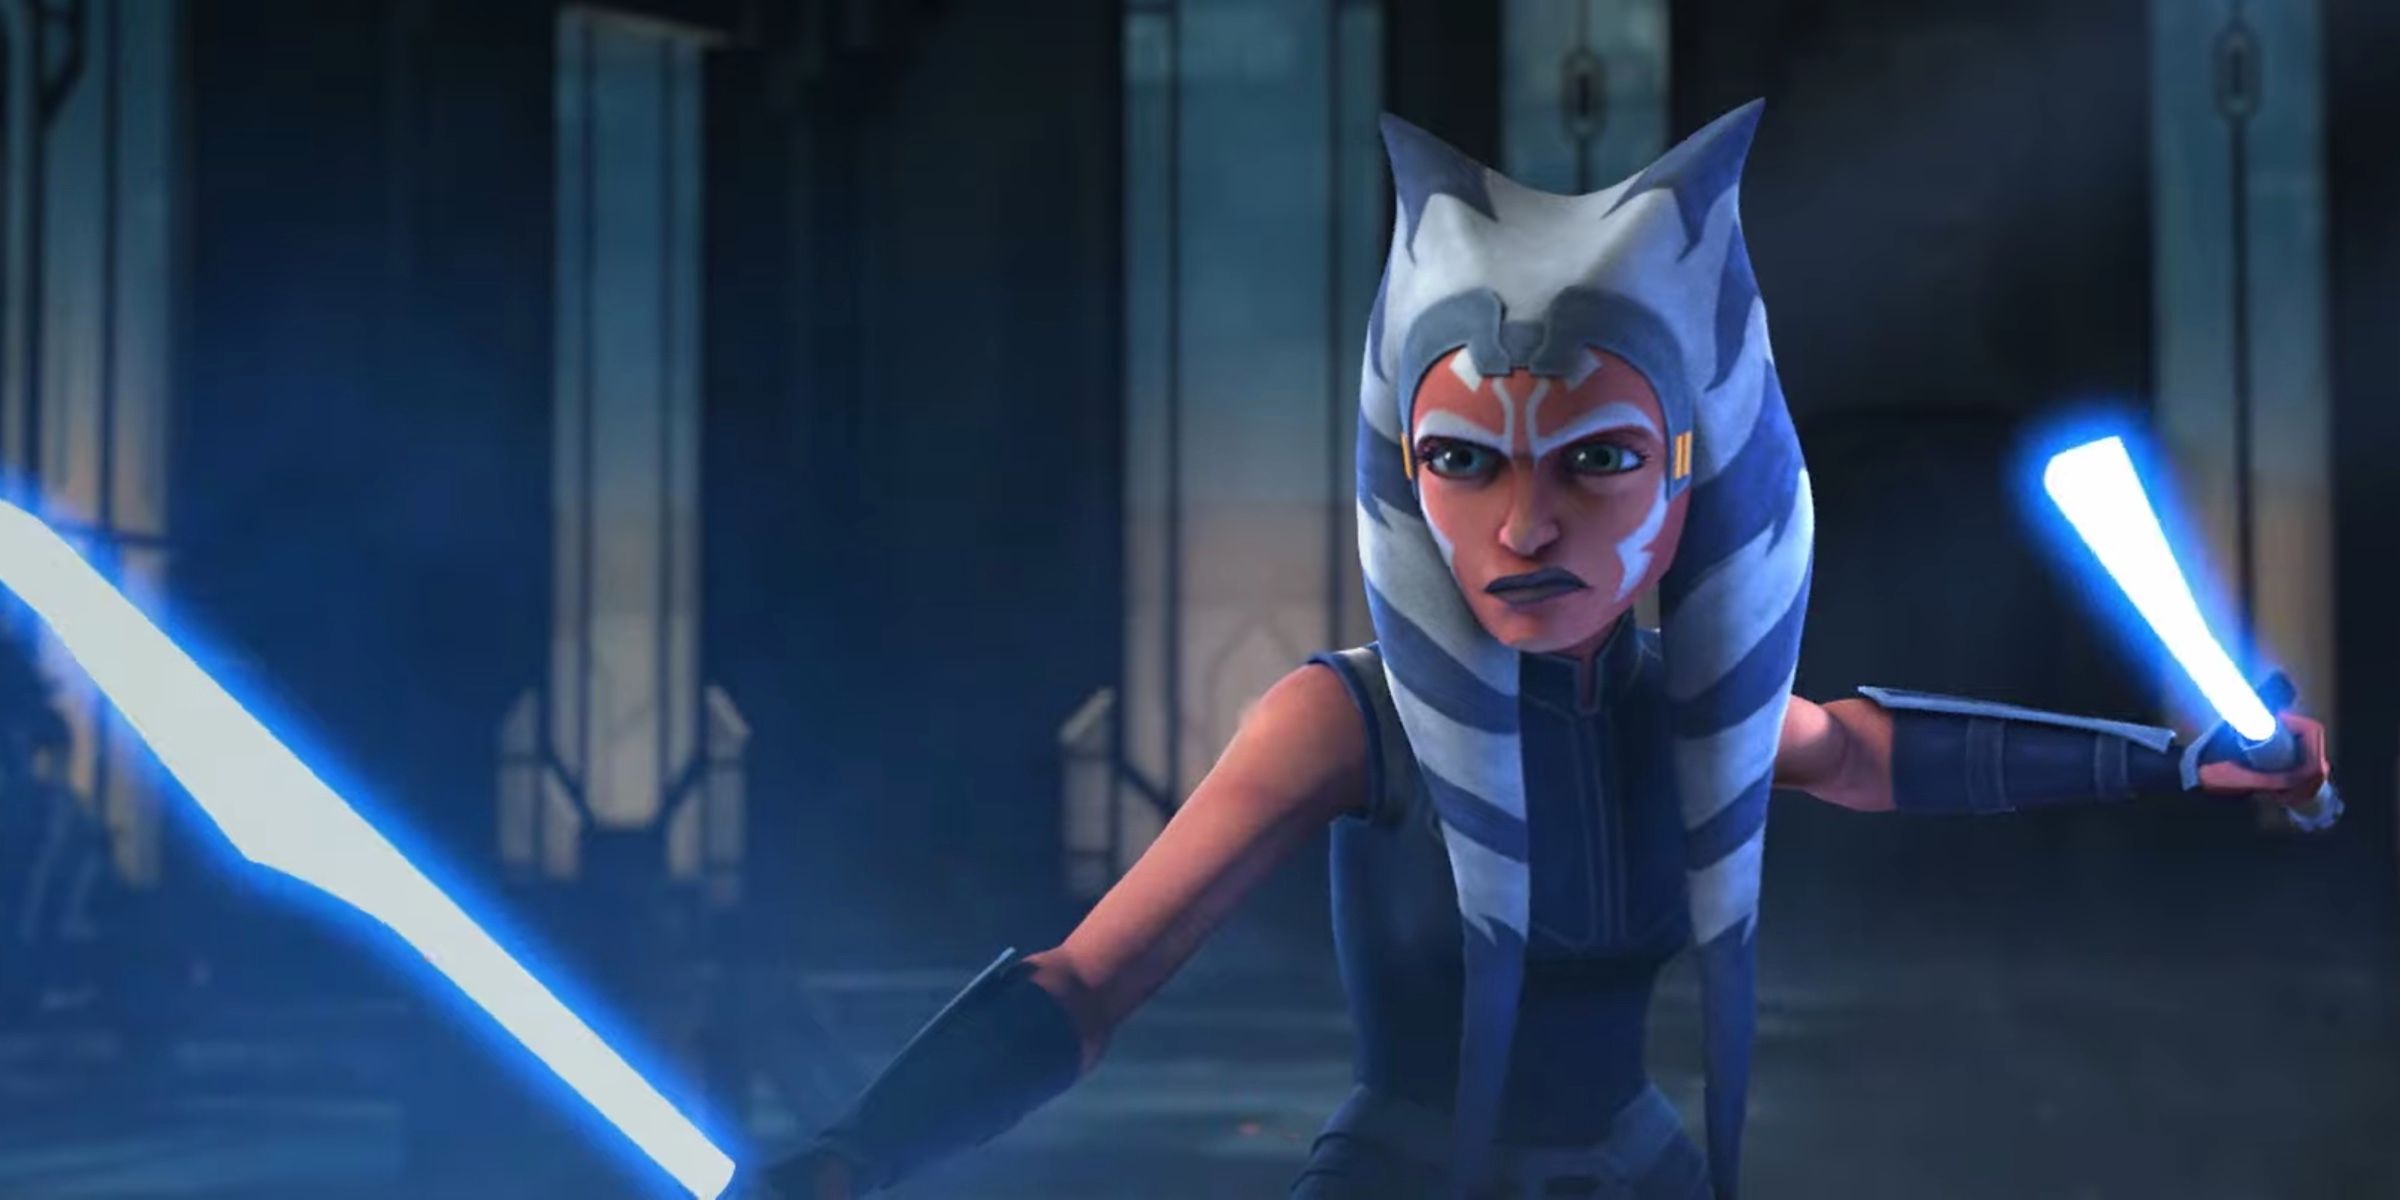 Ahsoka Tano faces off with Maul during the Siege of Mandalore in Clone Wars Season 7